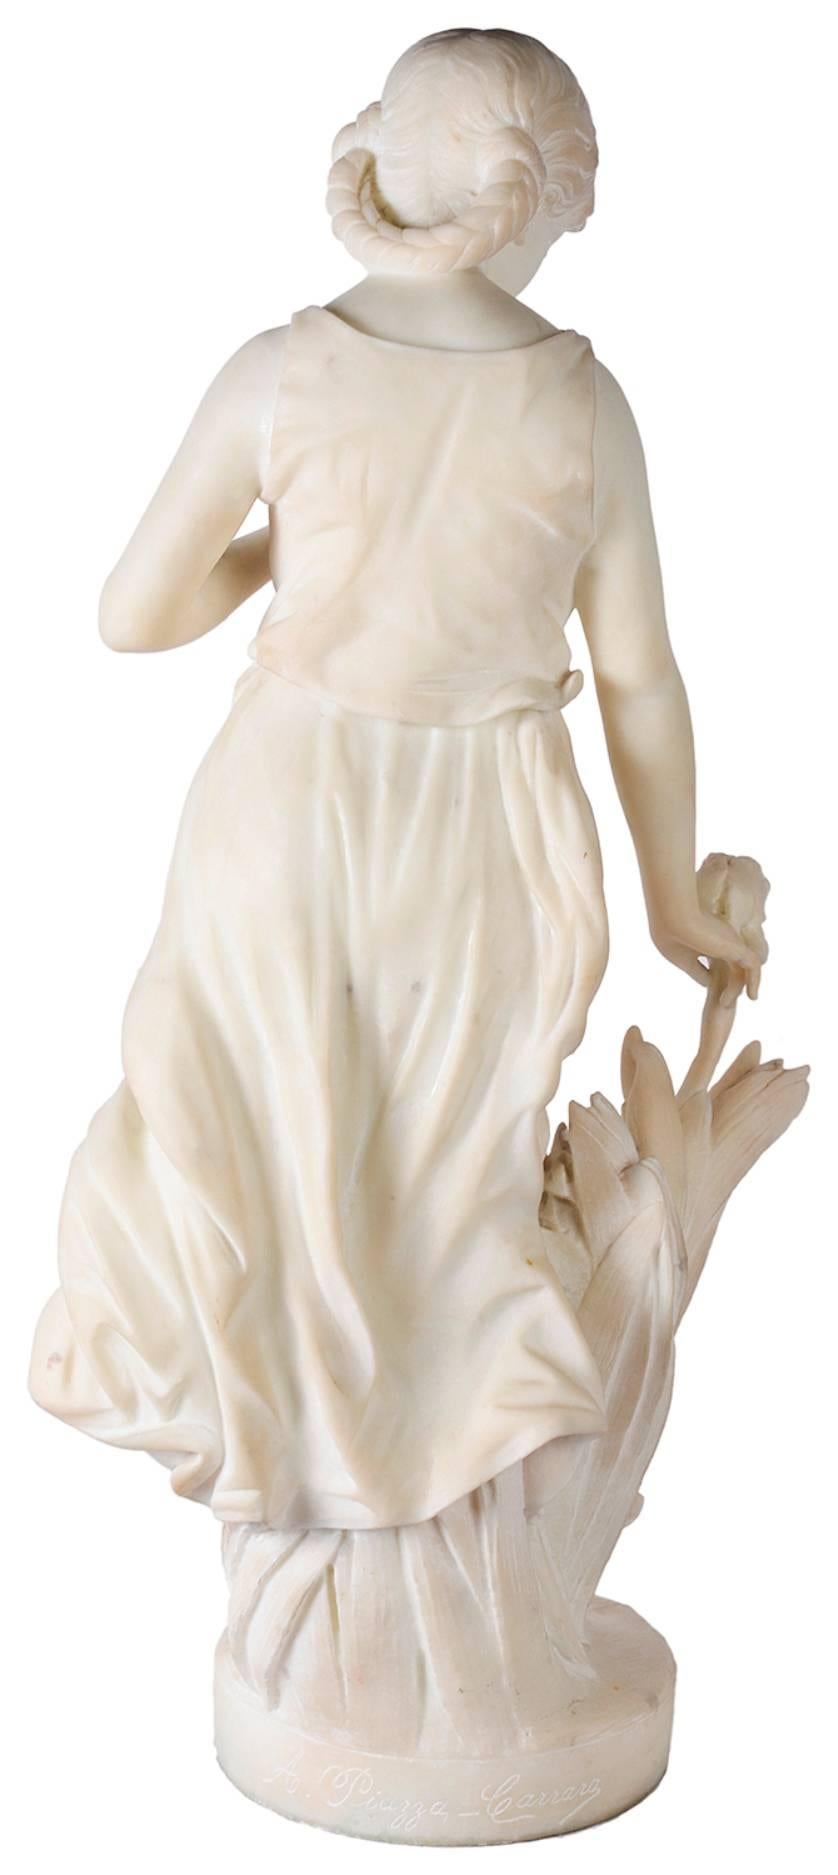 A very pleasing marble statue of a young girl holding a flower,
Signed; A, Piazza-Carrera.